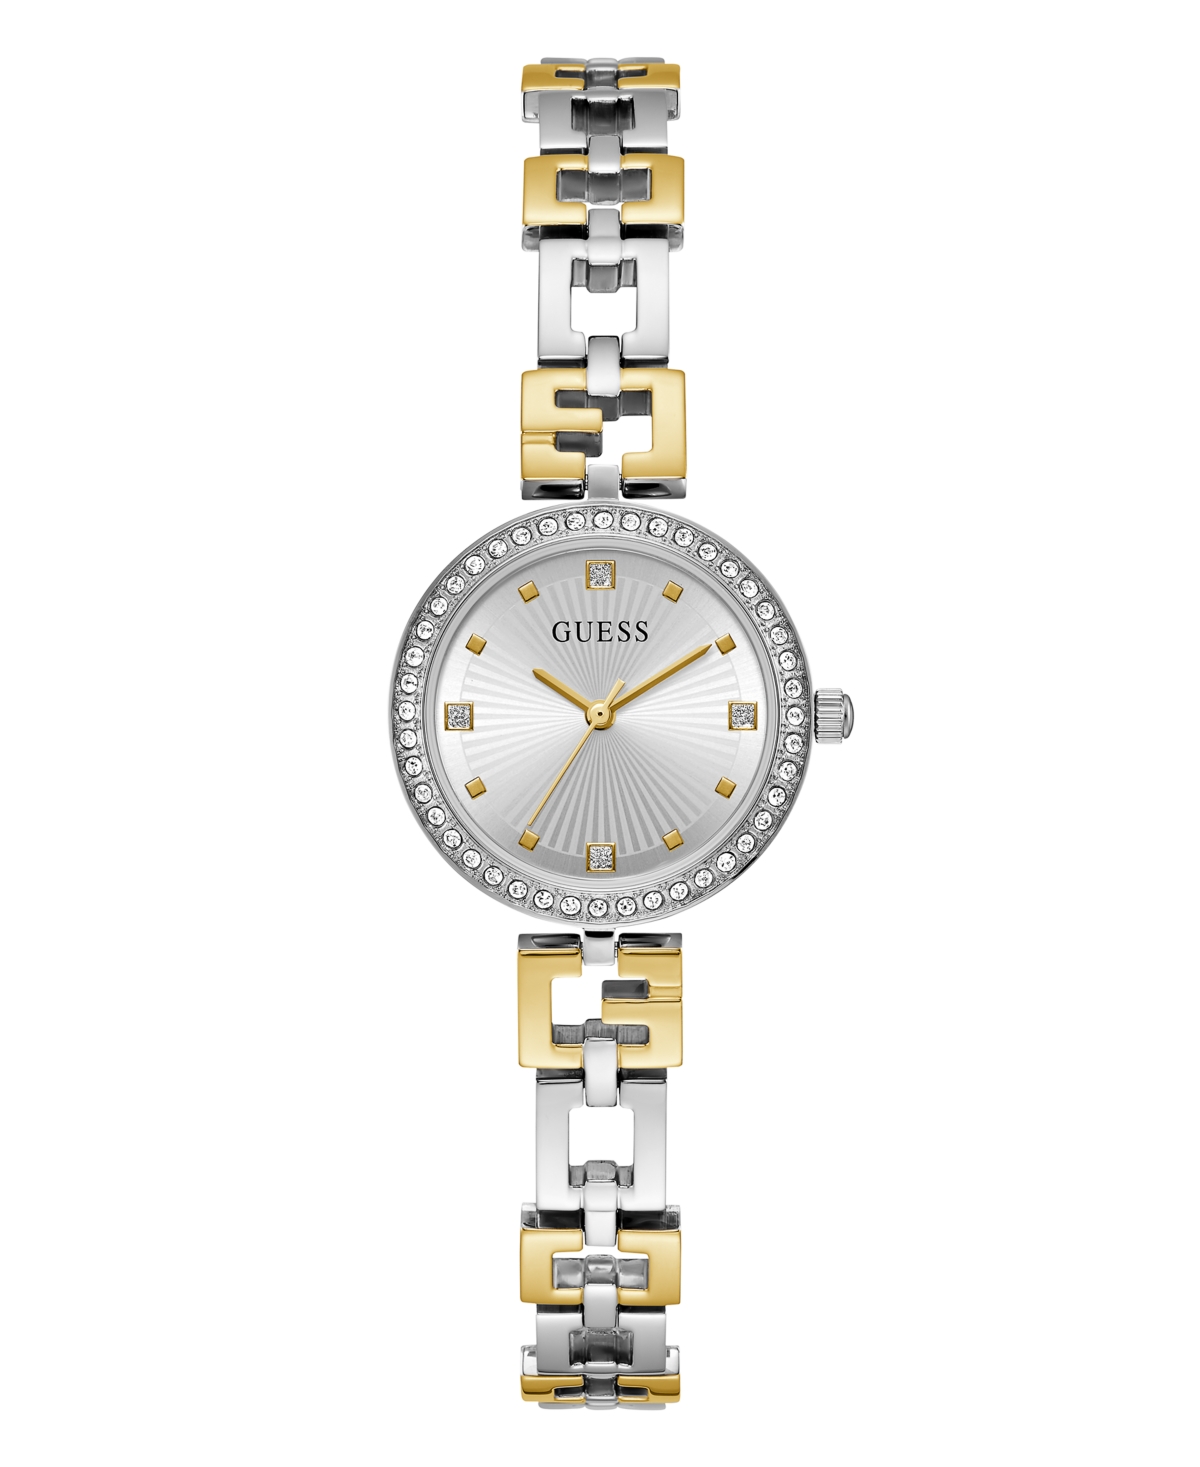 GUESS WOMEN'S ANALOG TWO-TONE STAINLESS STEEL WATCH 26MM